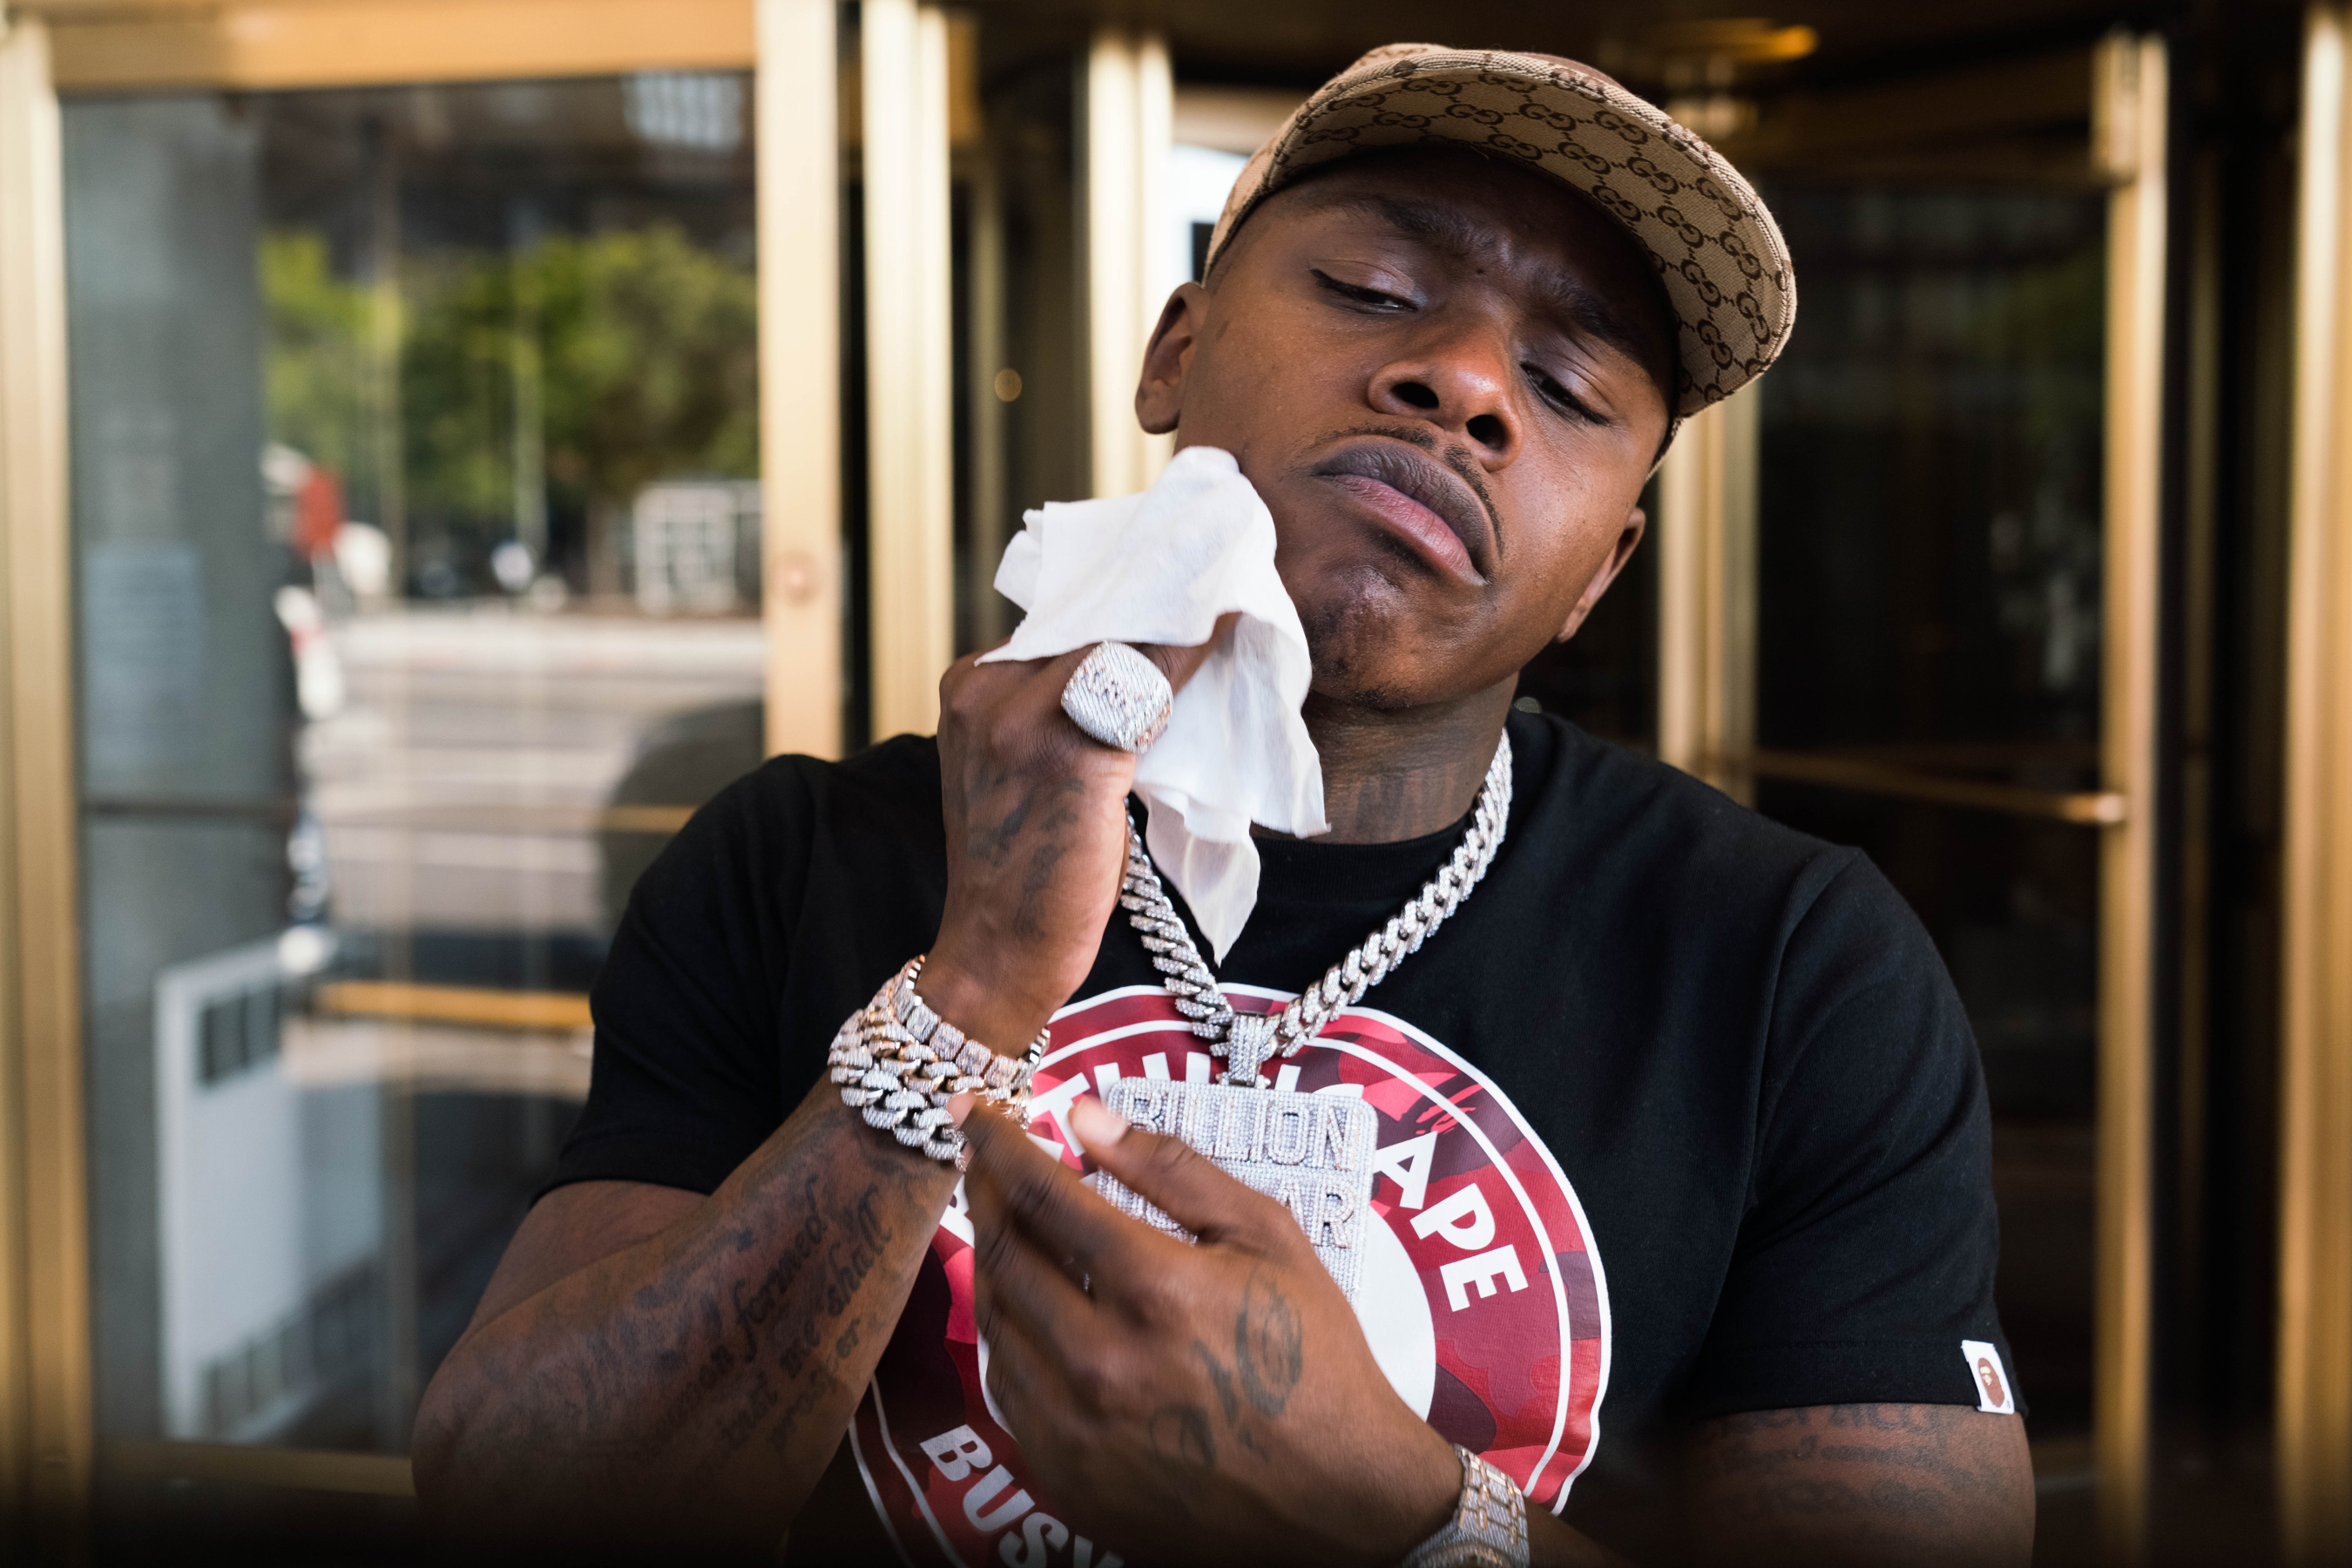 Find top songs and albums by dababy including suge, rockstar (feat. 